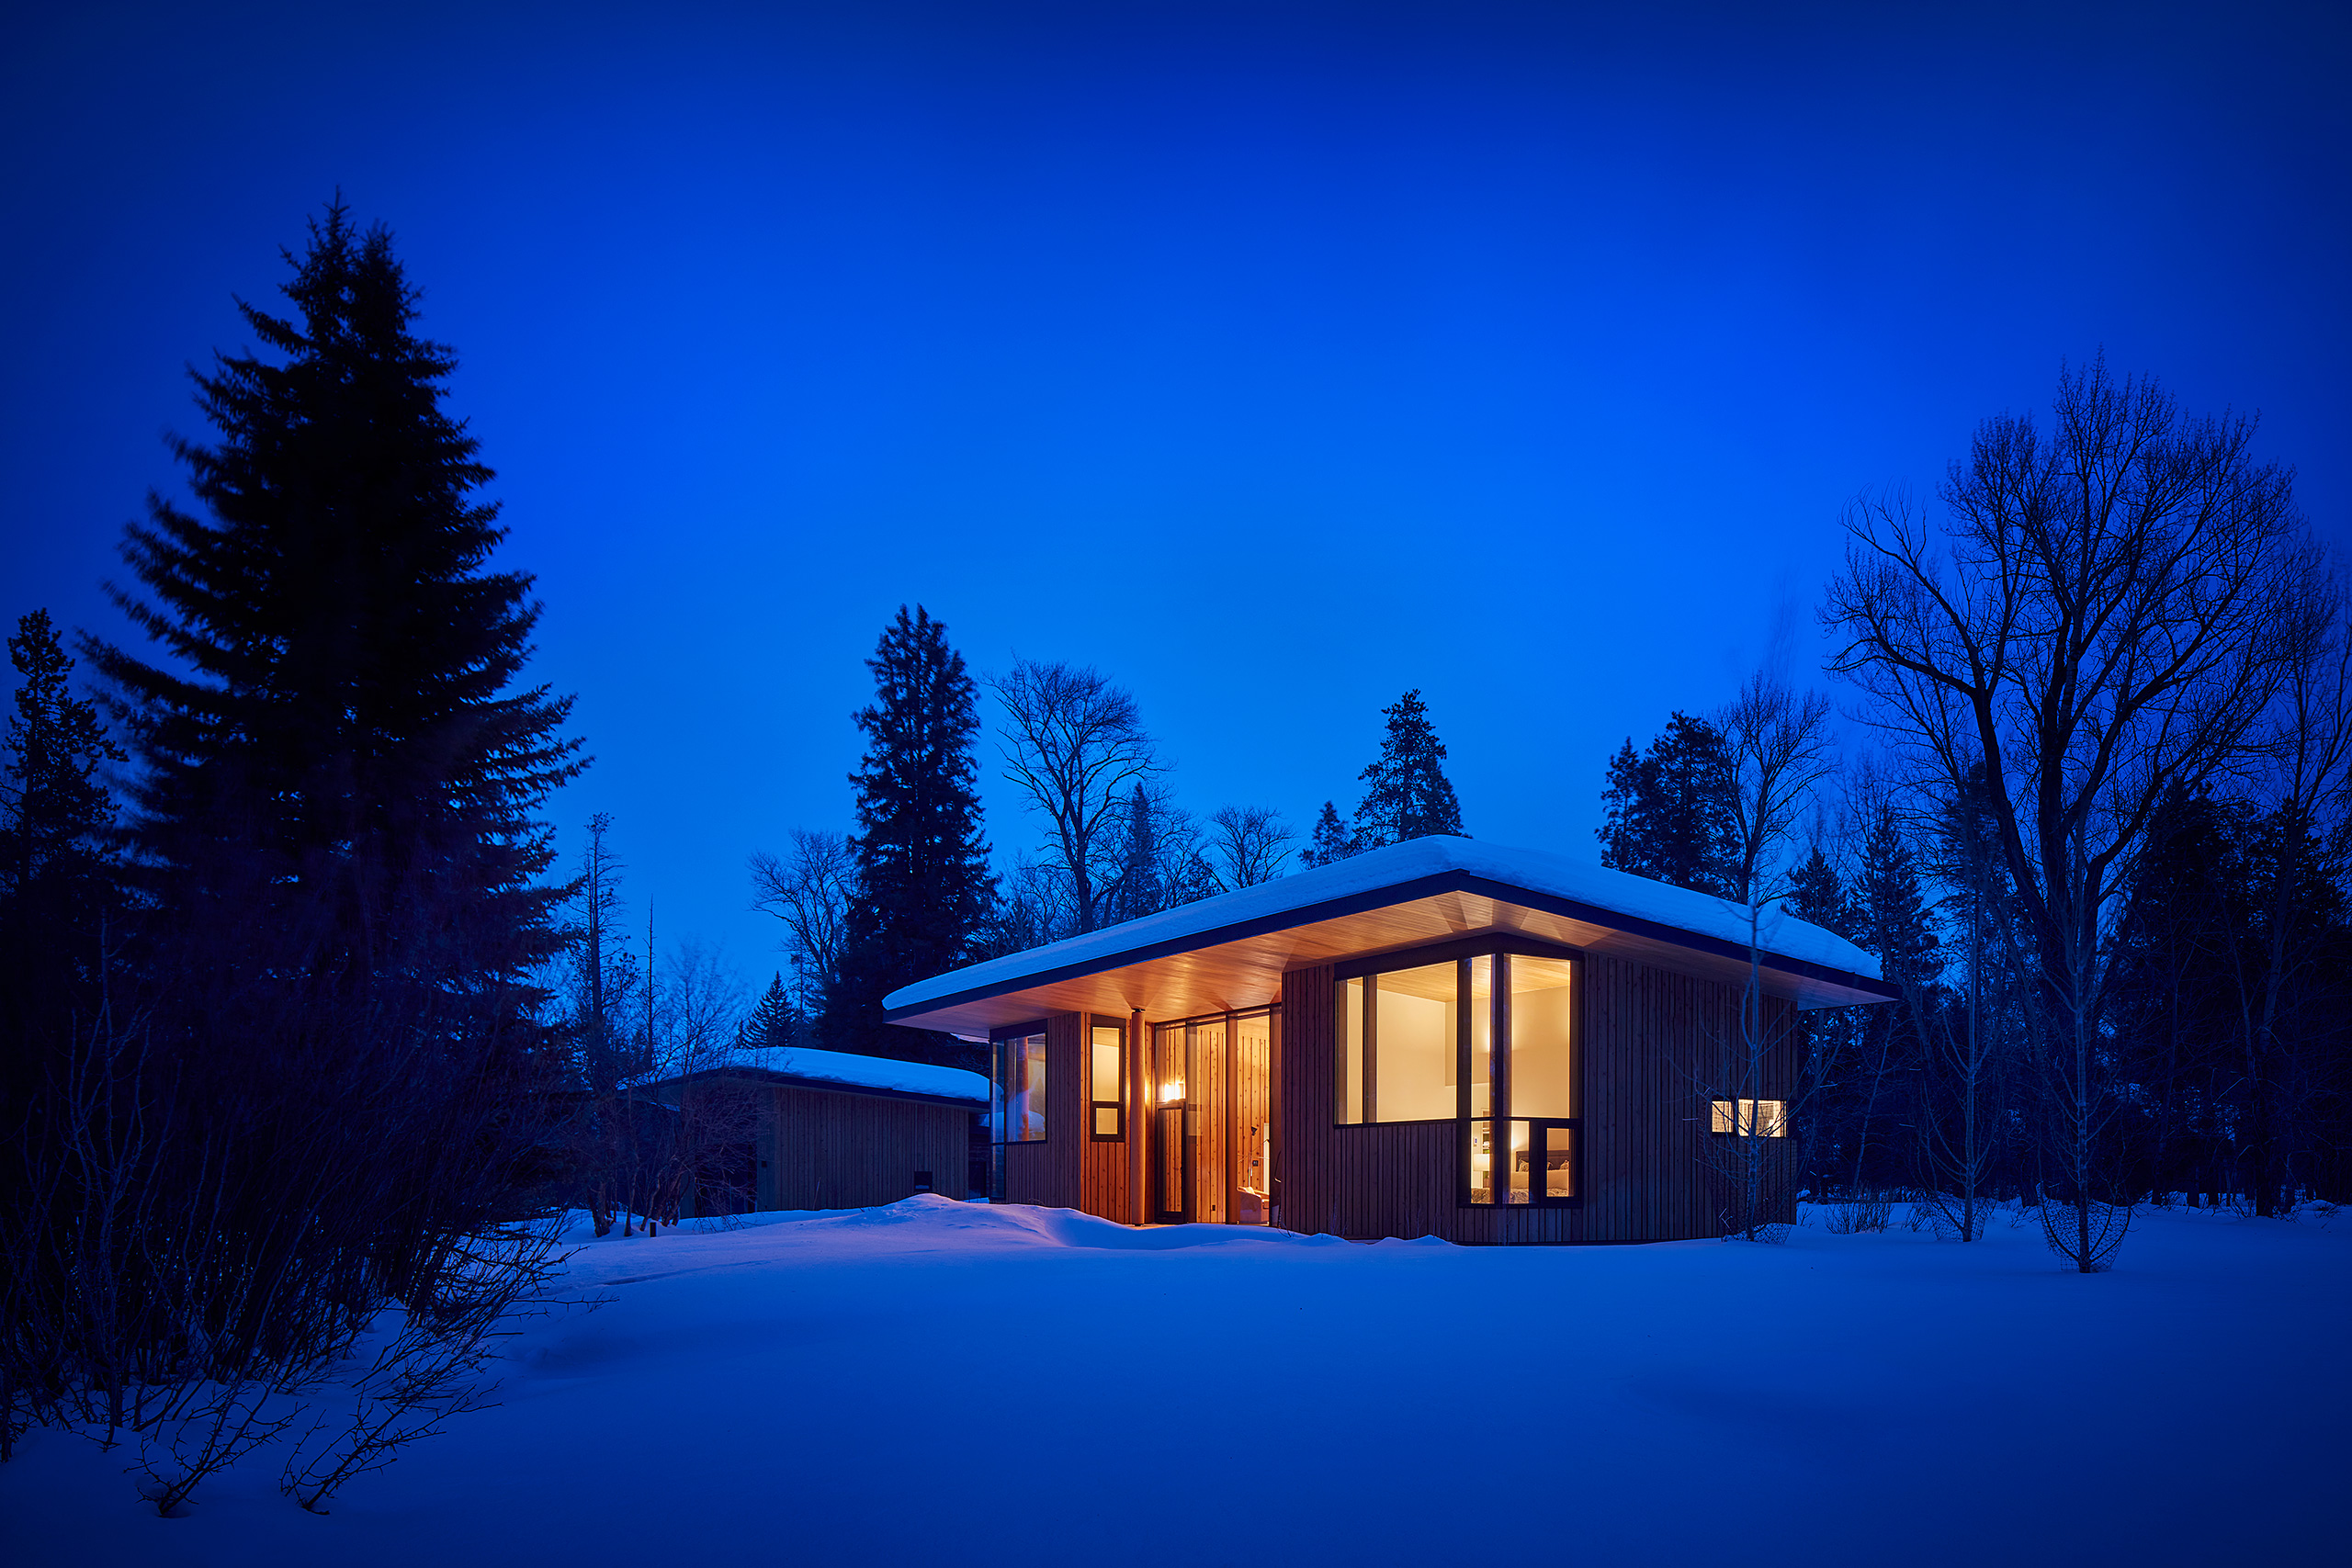 Guest house at night in the snow